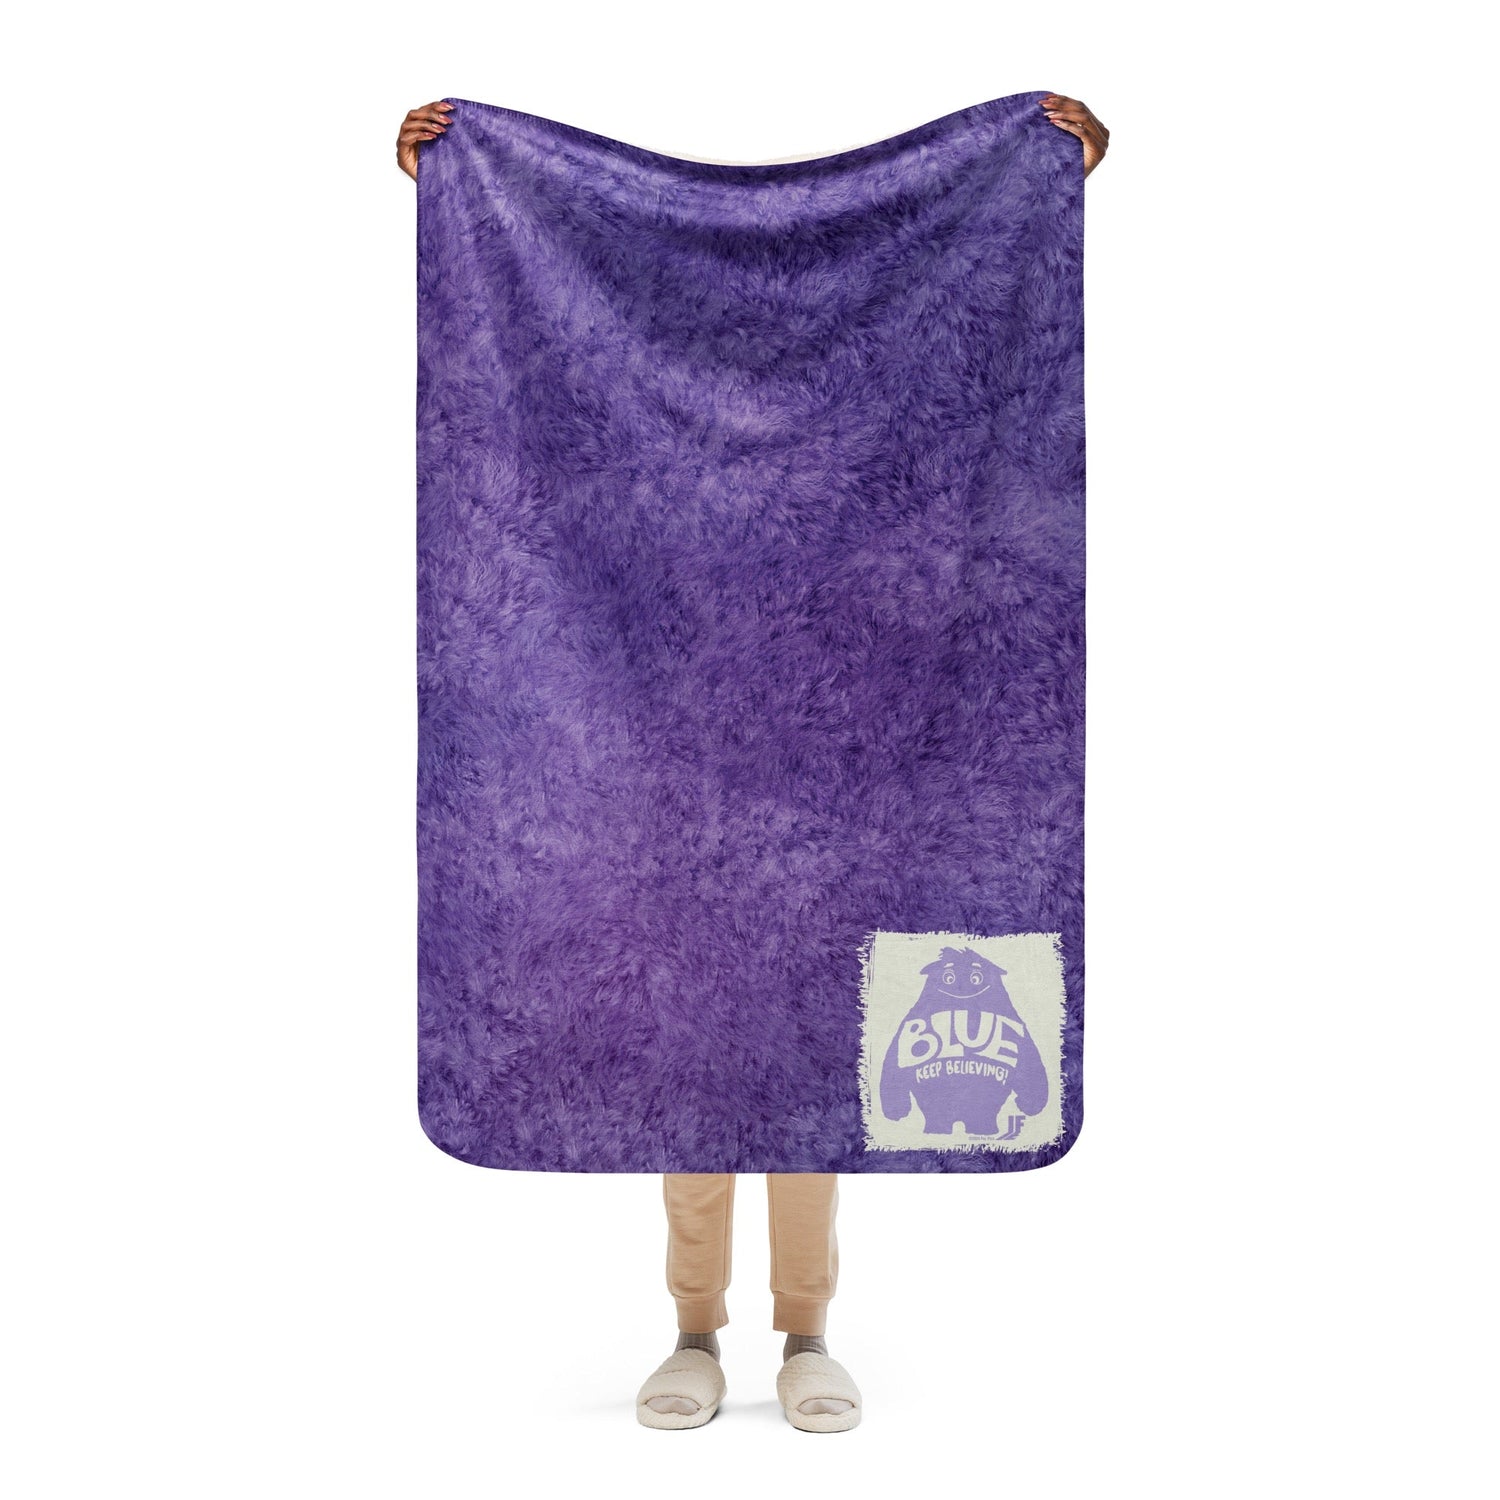 IF Blue Keep Believing Sherpa Blanket - Paramount Shop